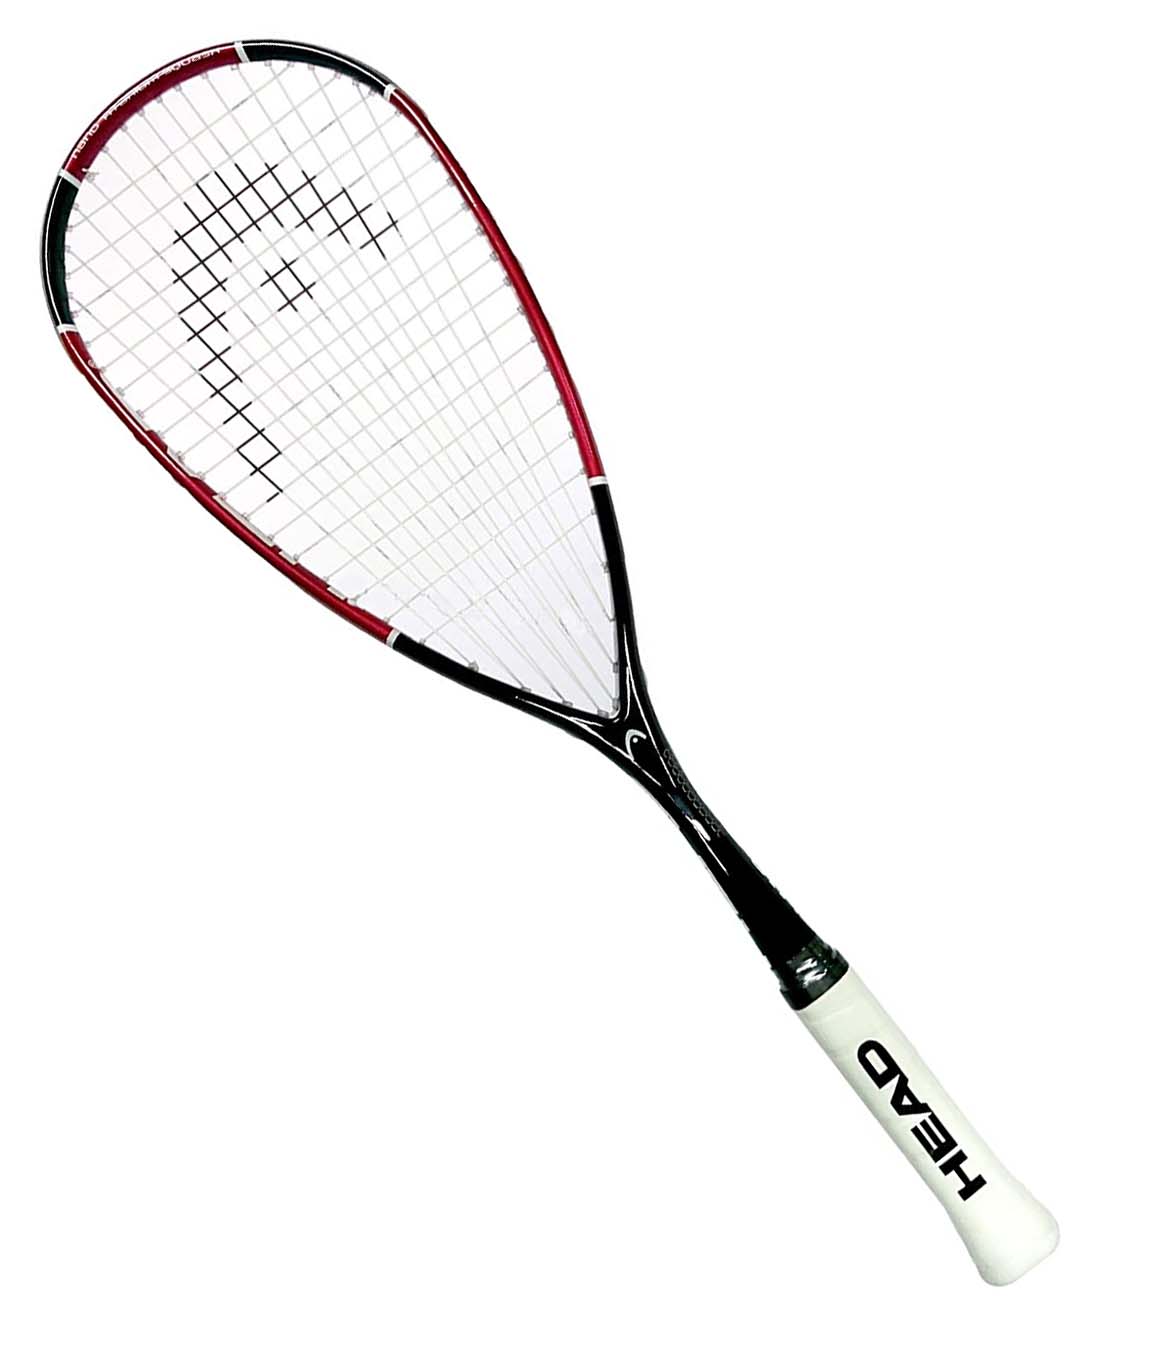 Best squash racquet for power and control